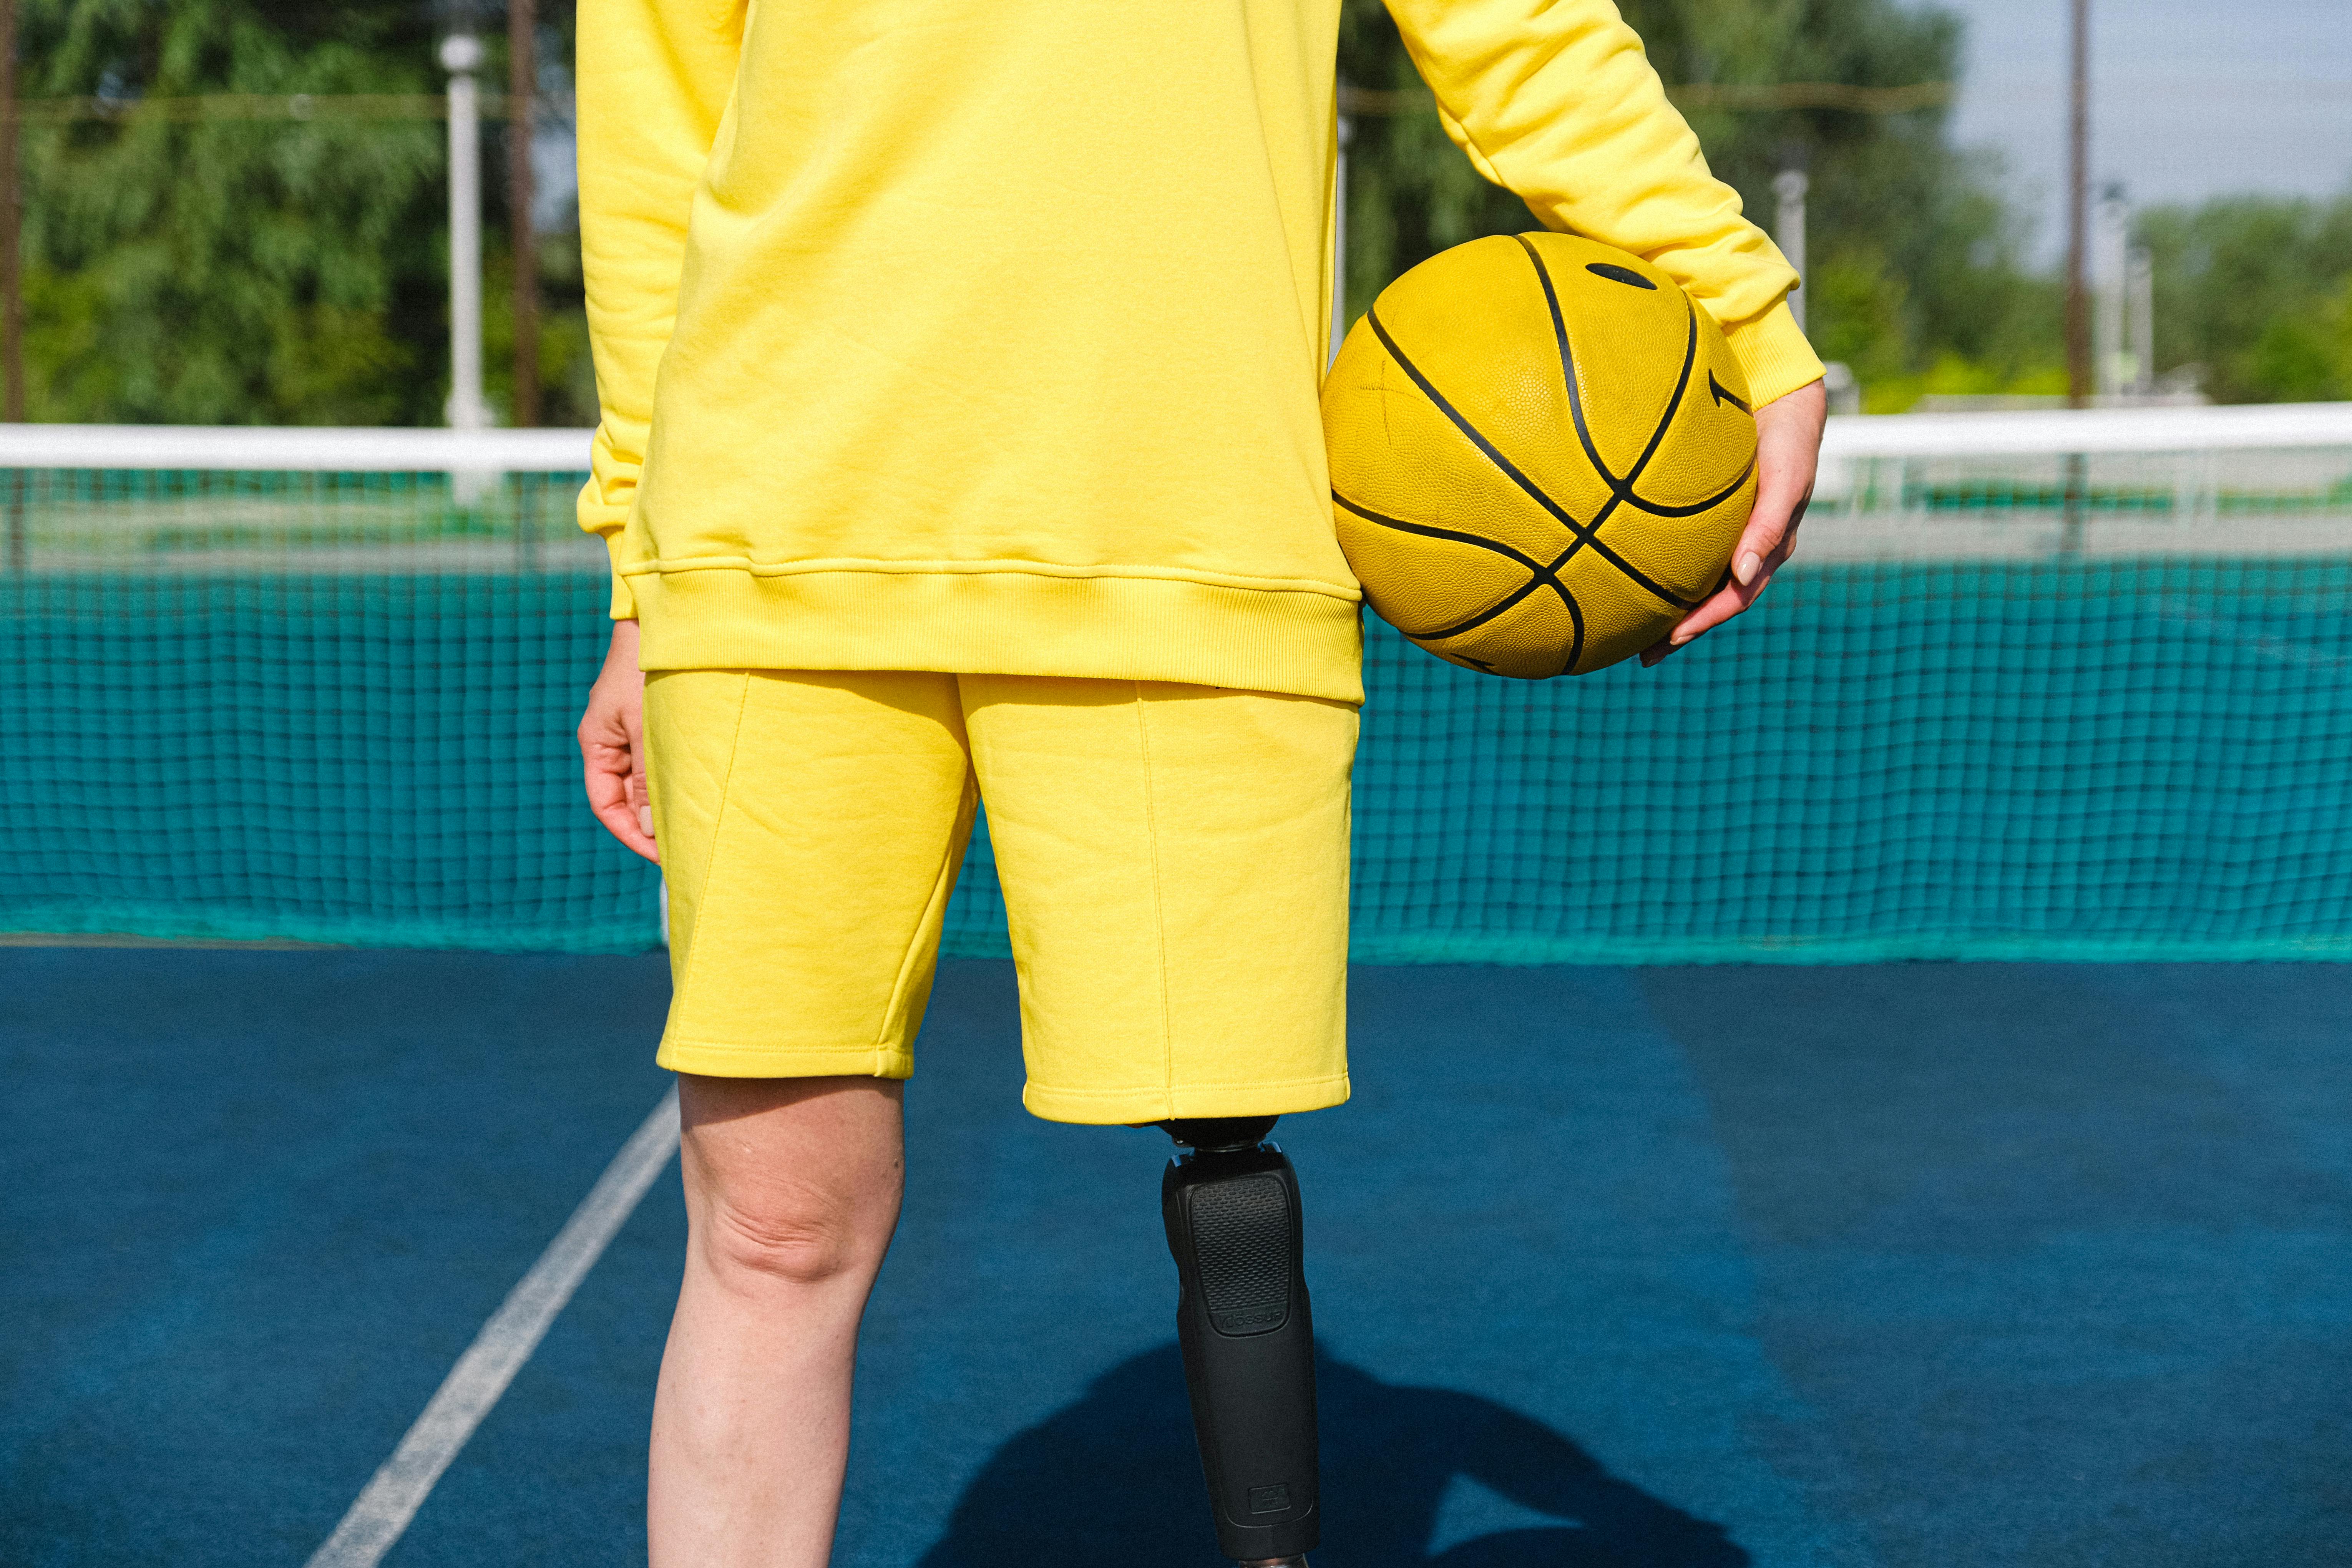 person with prosthetic leg and holding basketball ball